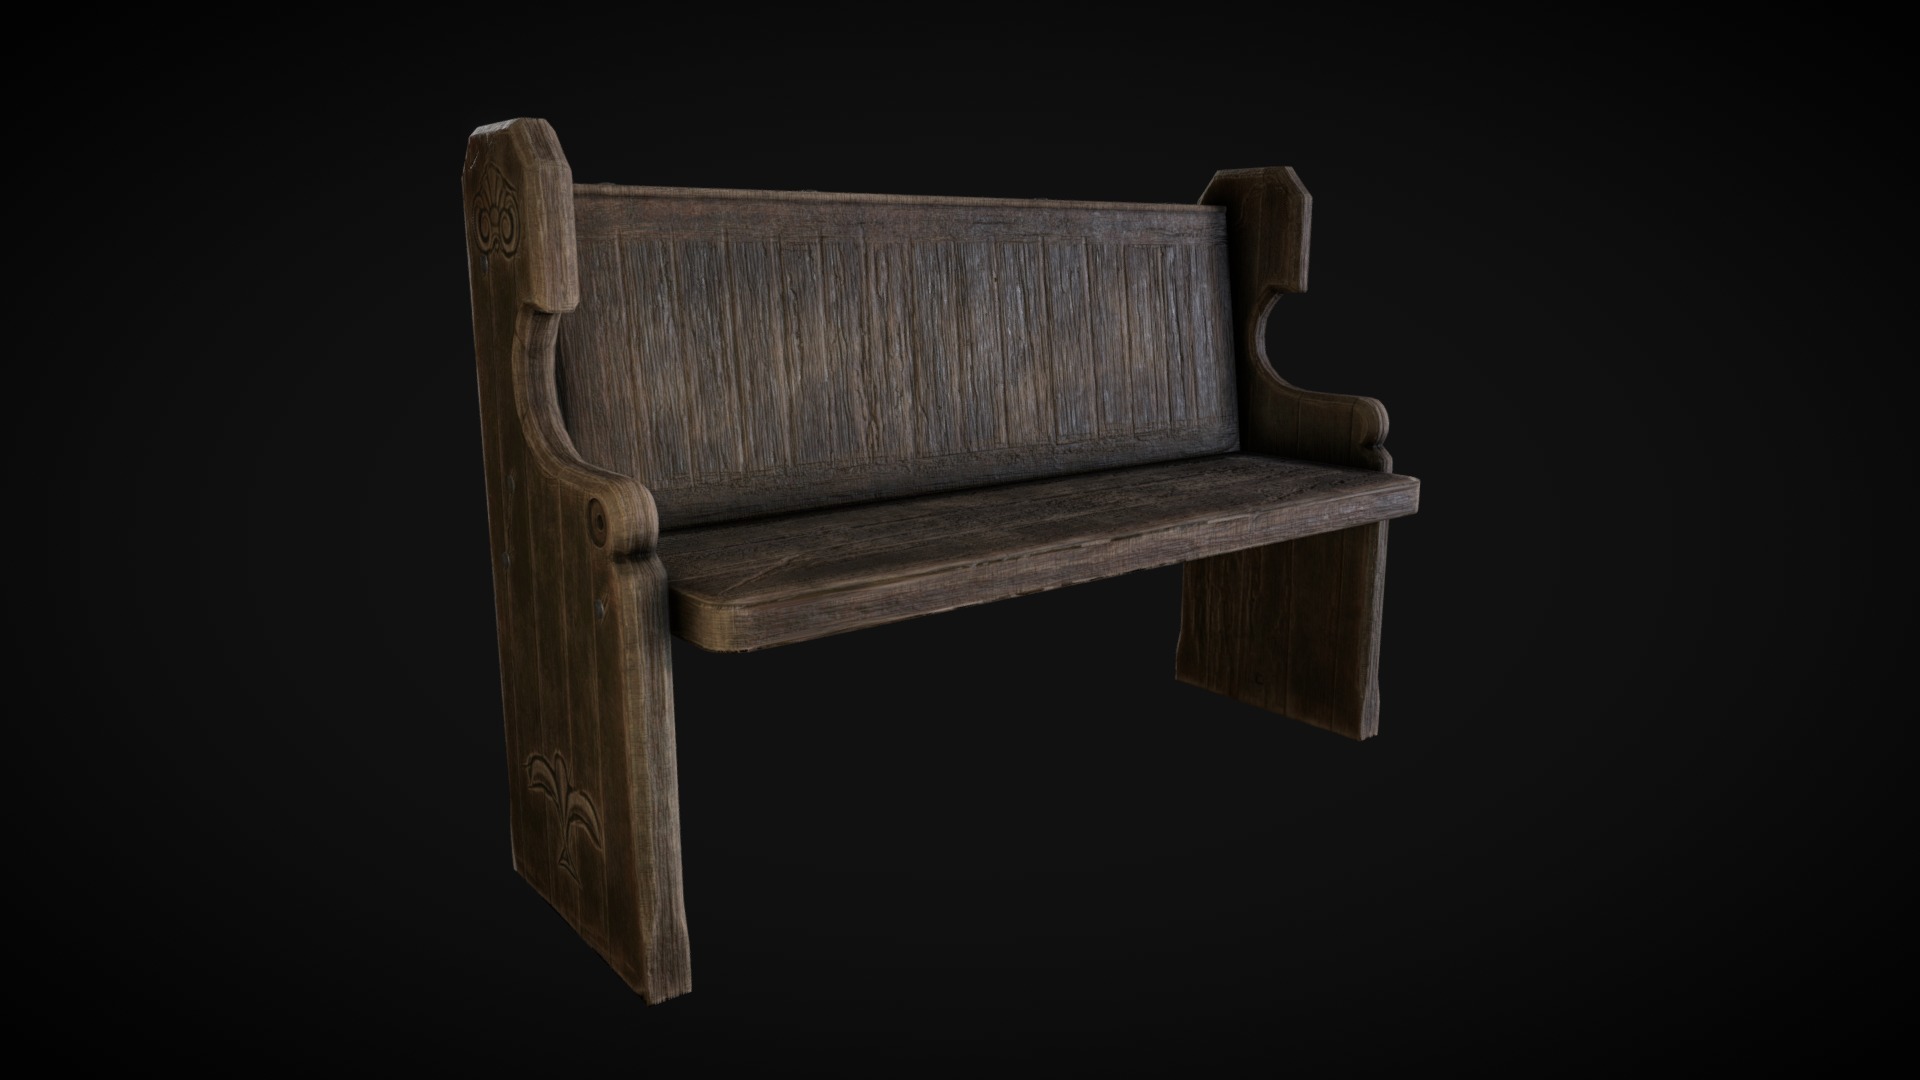 3D model Church Pew Bench - This is a 3D model of the Church Pew Bench. The 3D model is about a wooden bench with a black background.